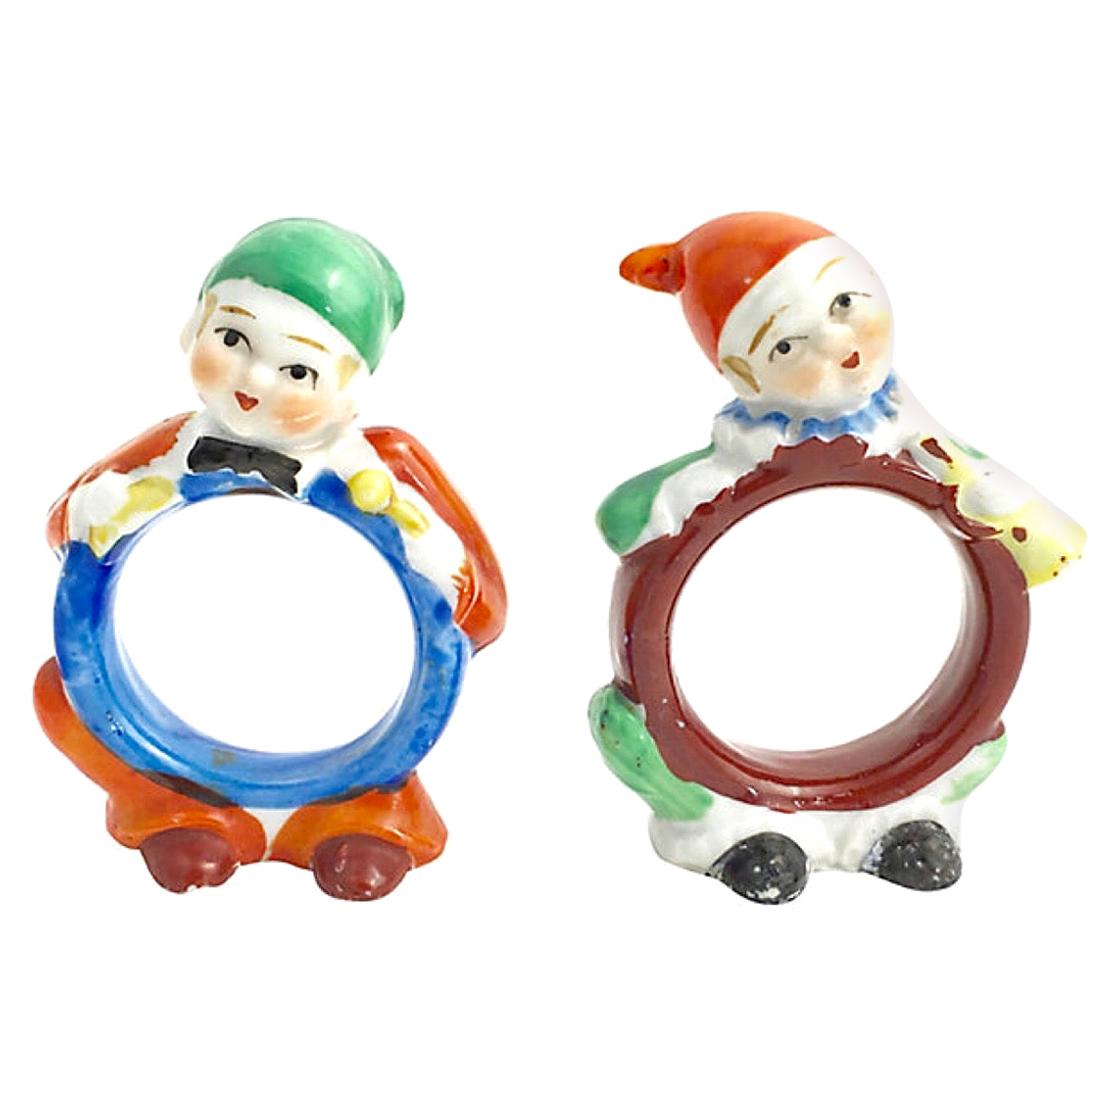 Two Adorable Figural Towel Ring Holders